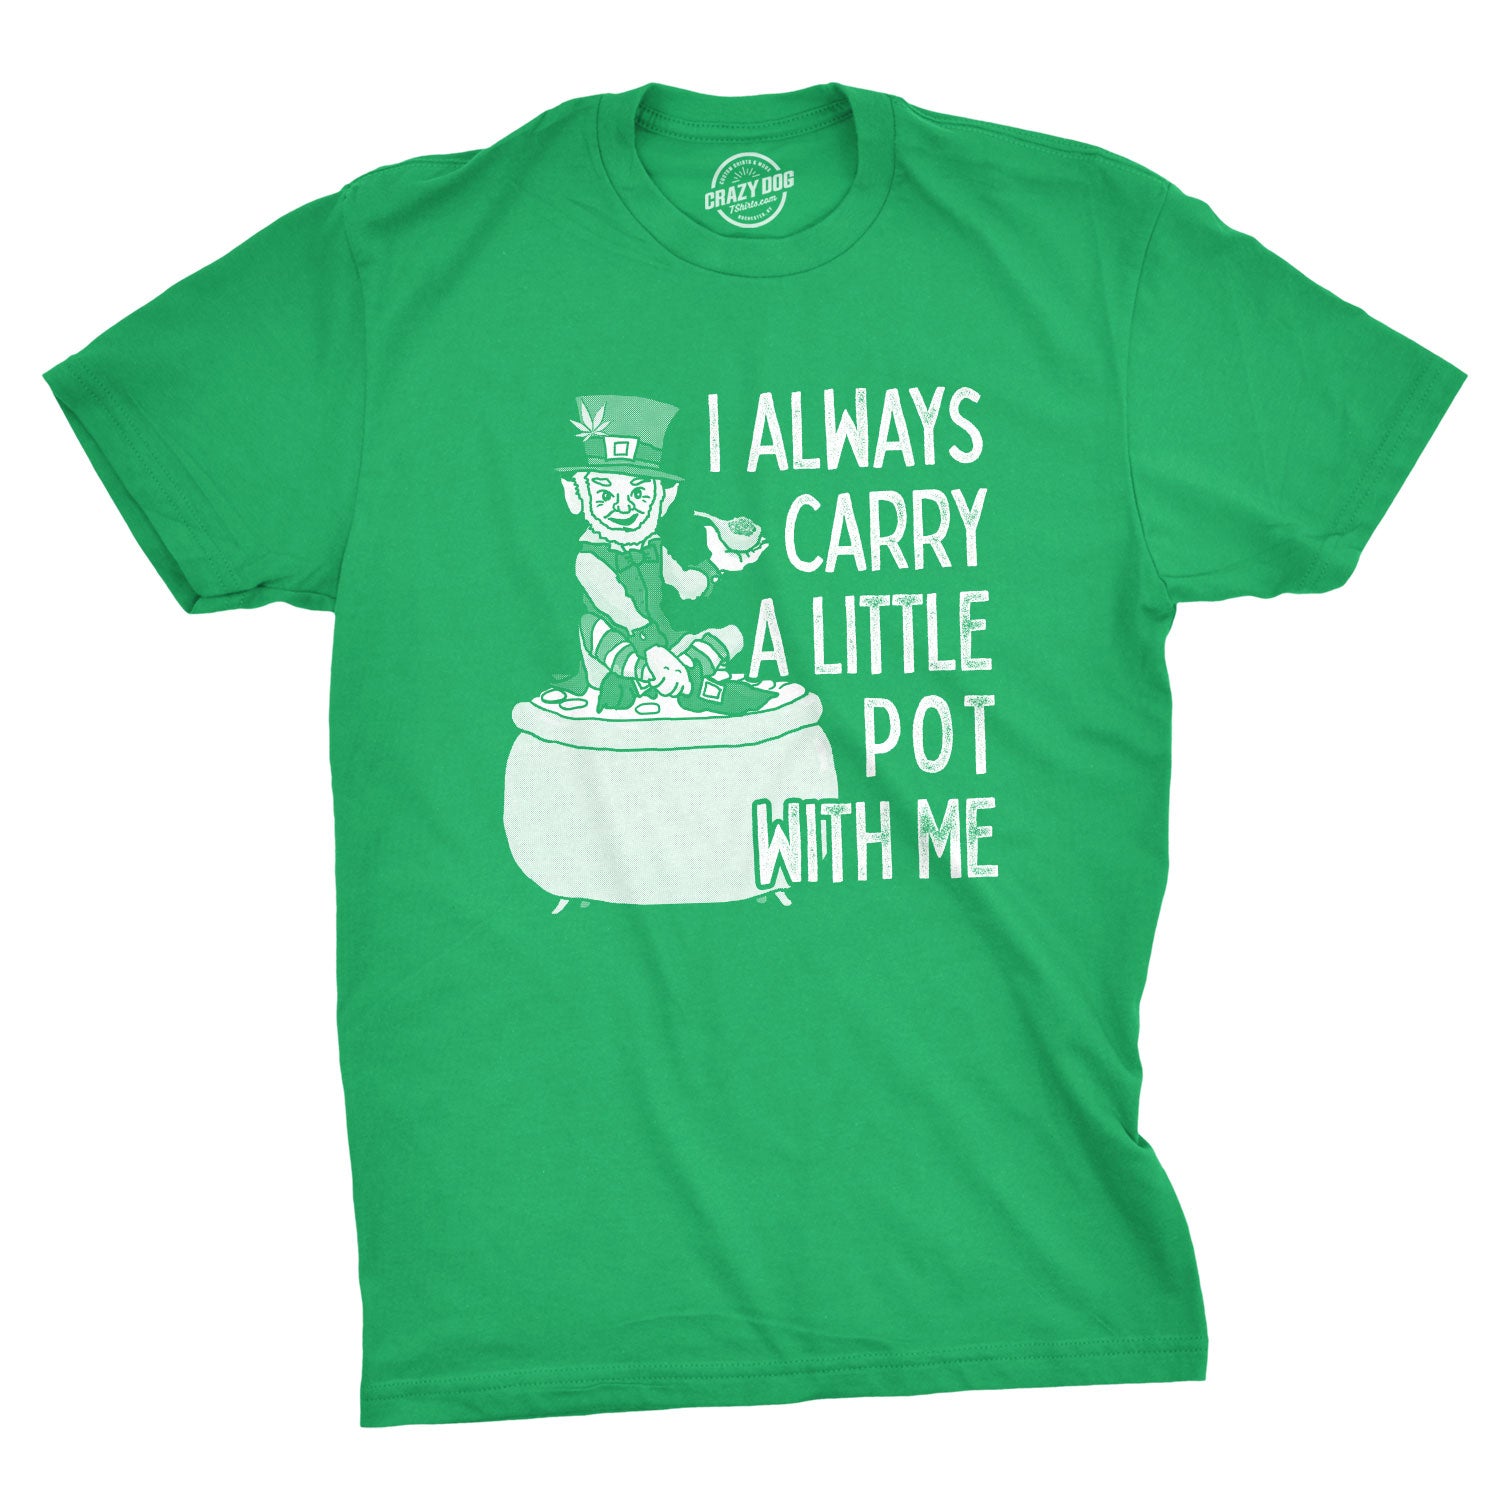 Funny Green I Always Carry A Little Pot With Me Mens T Shirt Nerdy Saint Patrick's Day Tee